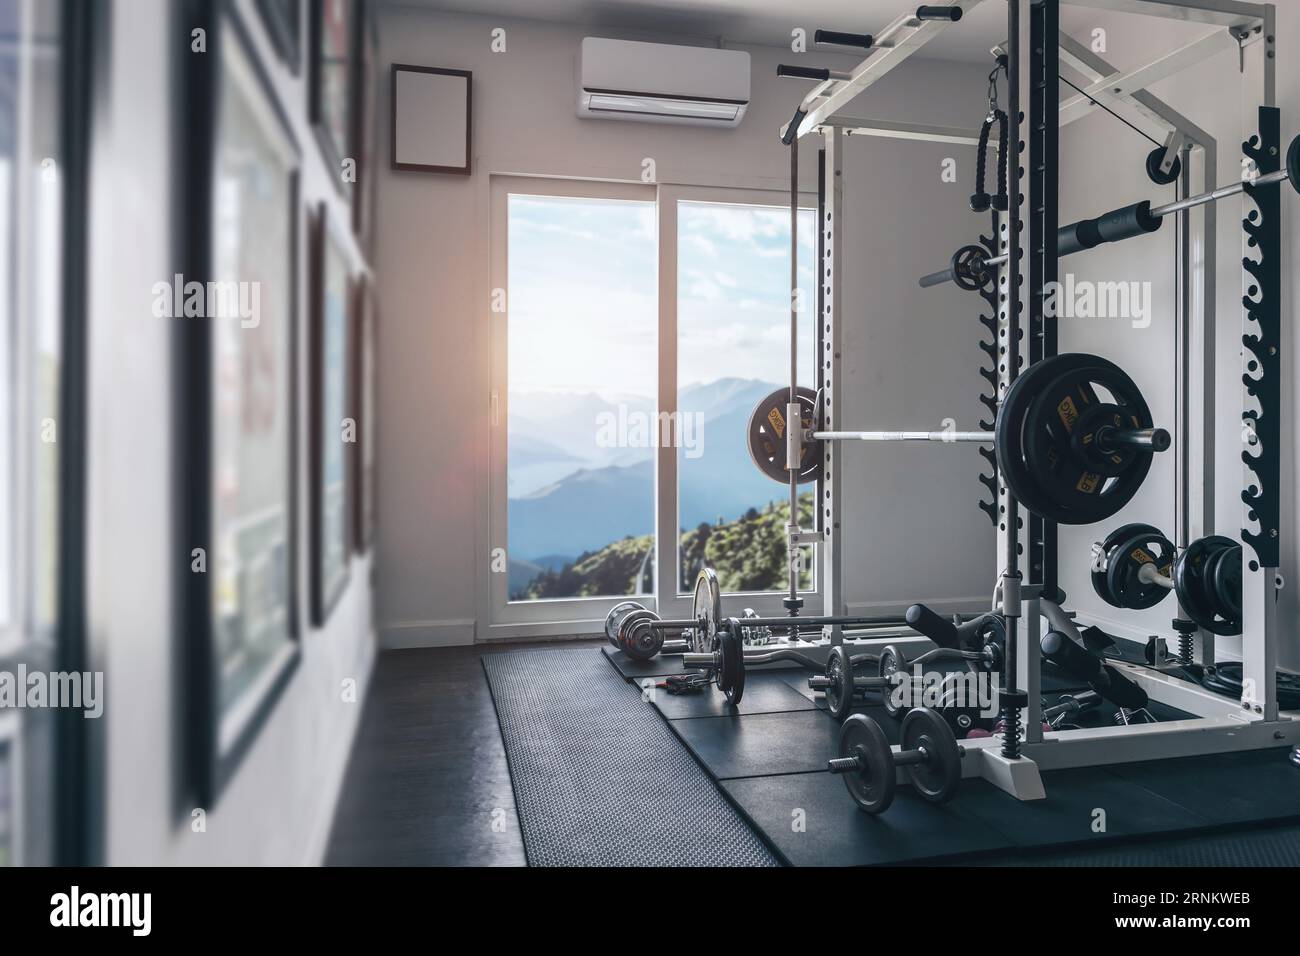 Cozy personal gym sport fitness weightlifeting room with beautiful mountain hill windows nature view Stock Photo